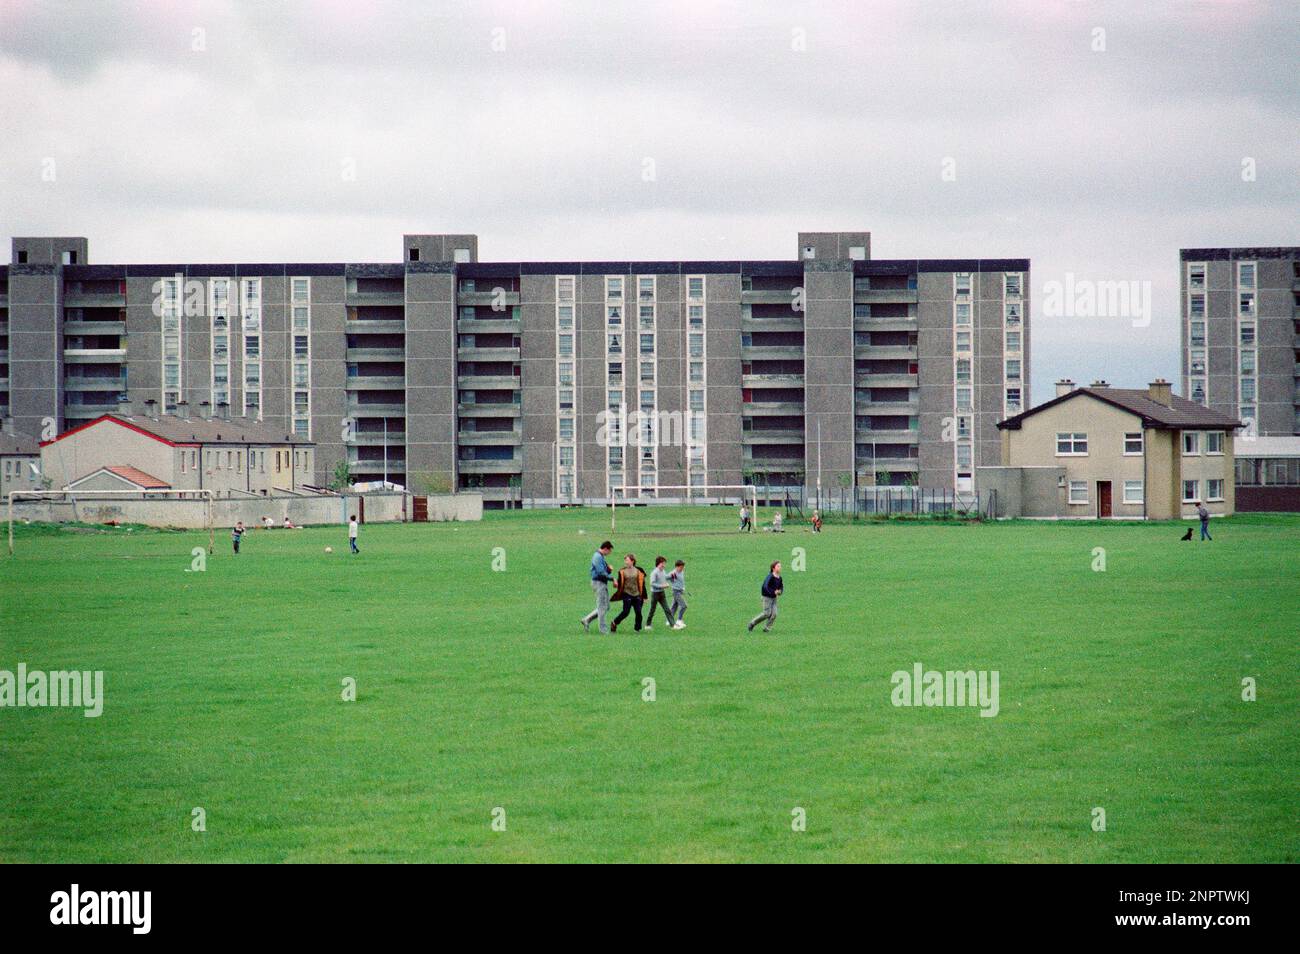 Children playing on lawn, flats, Coultry Road, Ballymun, Dublin, Republic of Ireland, June 1986 Stock Photo